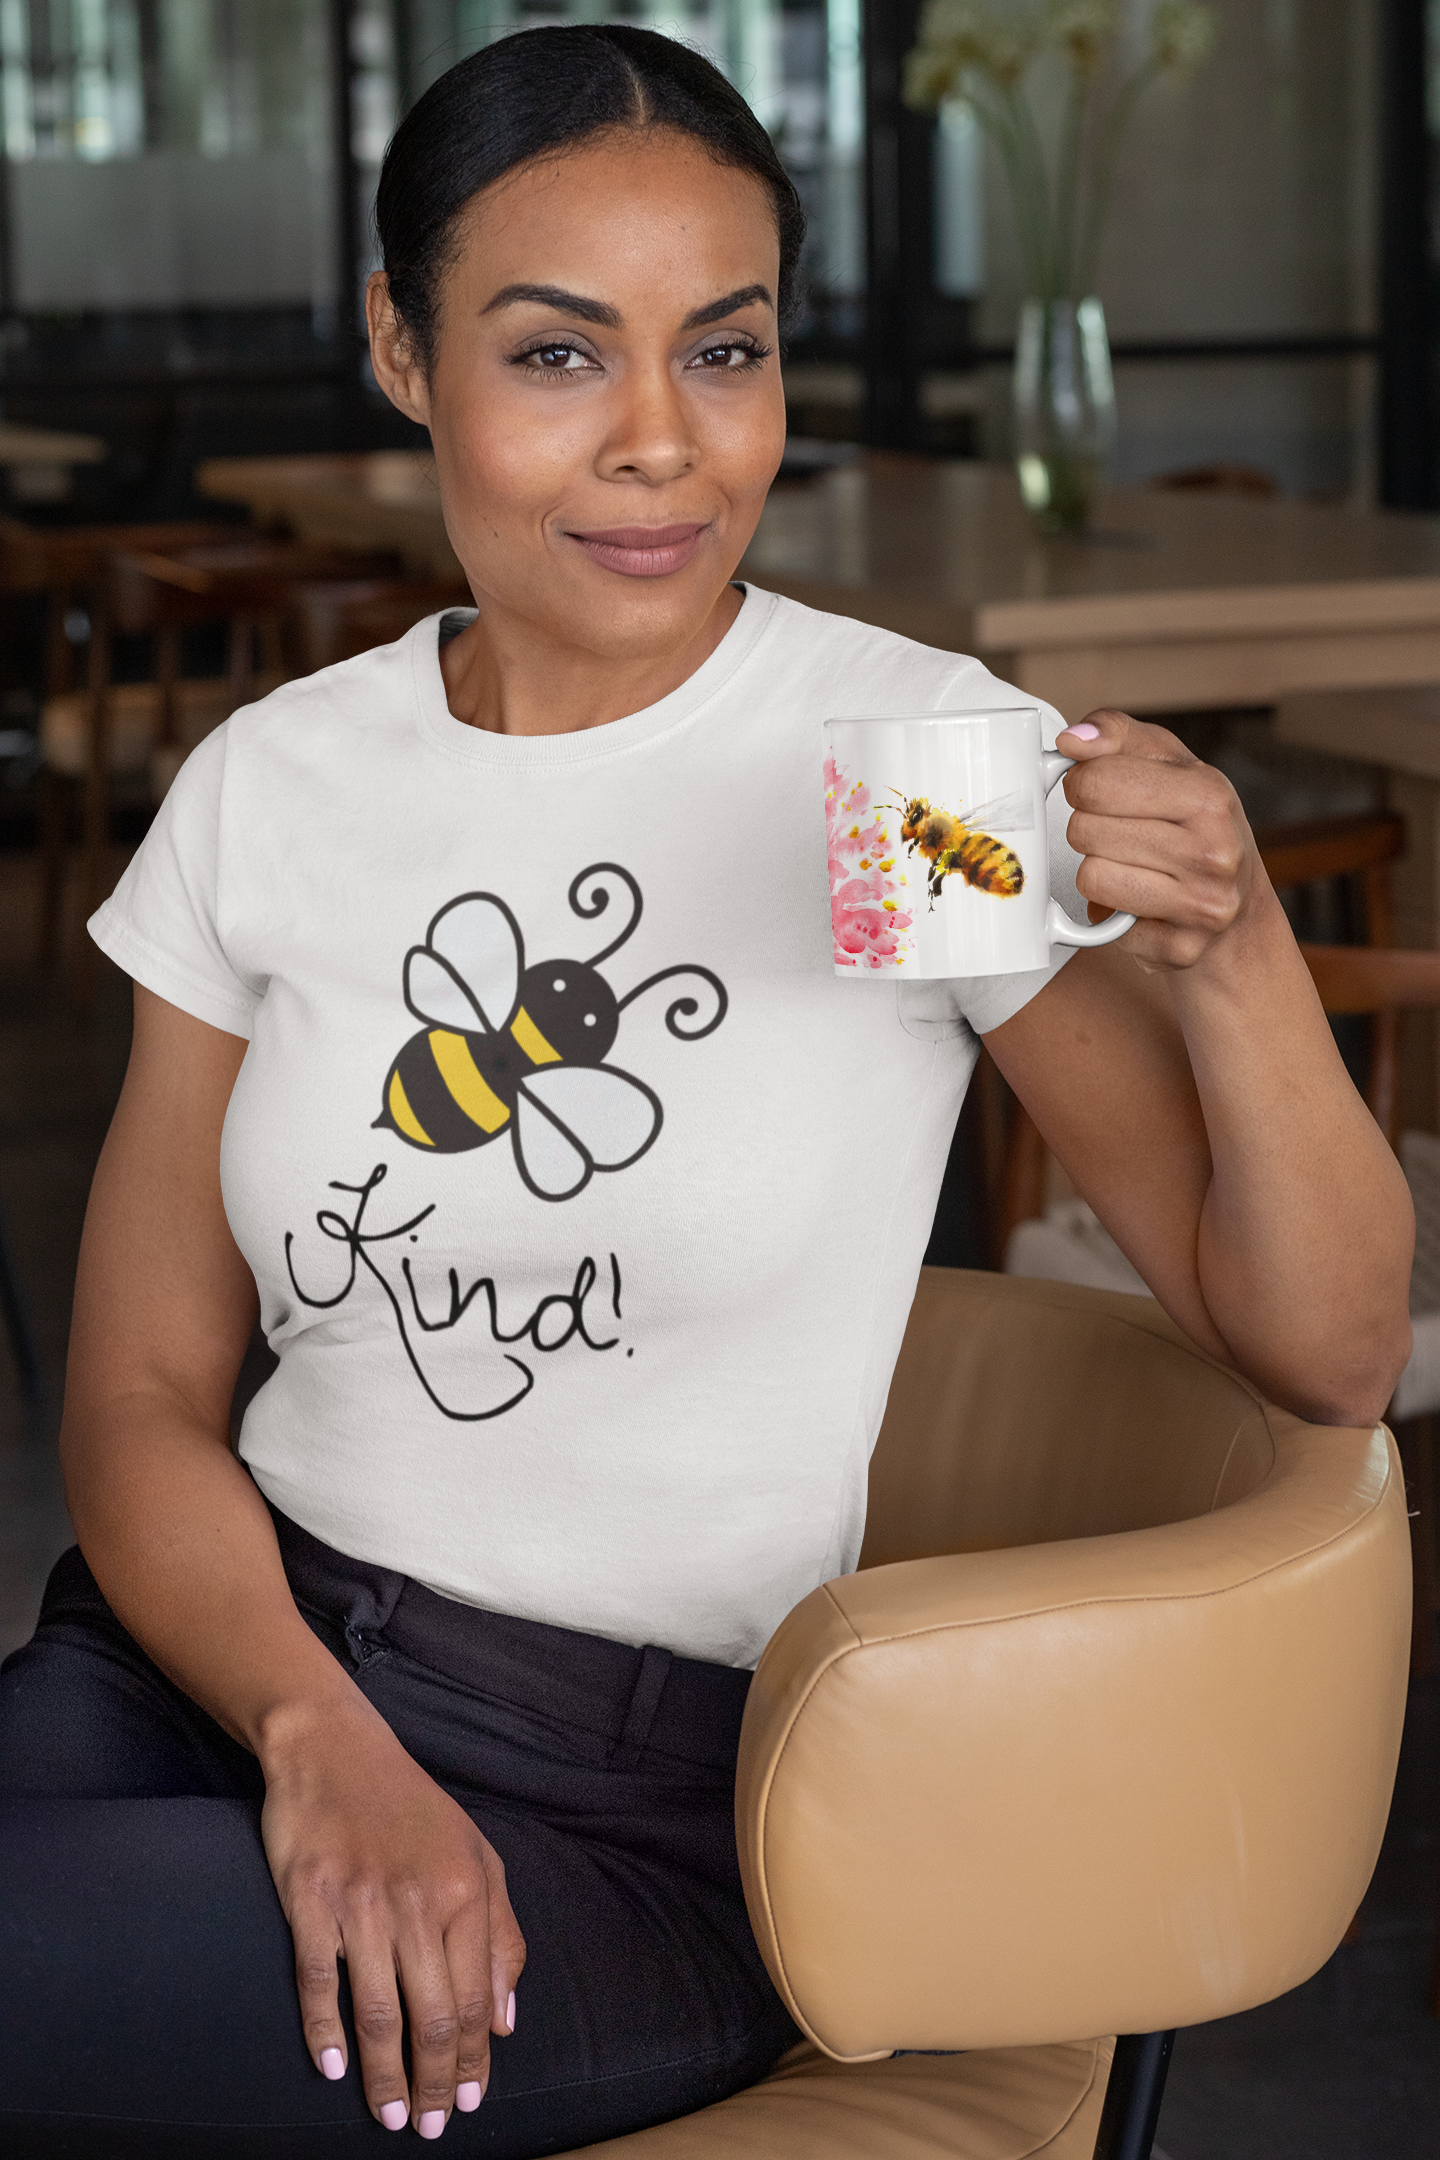 How to Shop for bee themed gifts? A bee gift guide